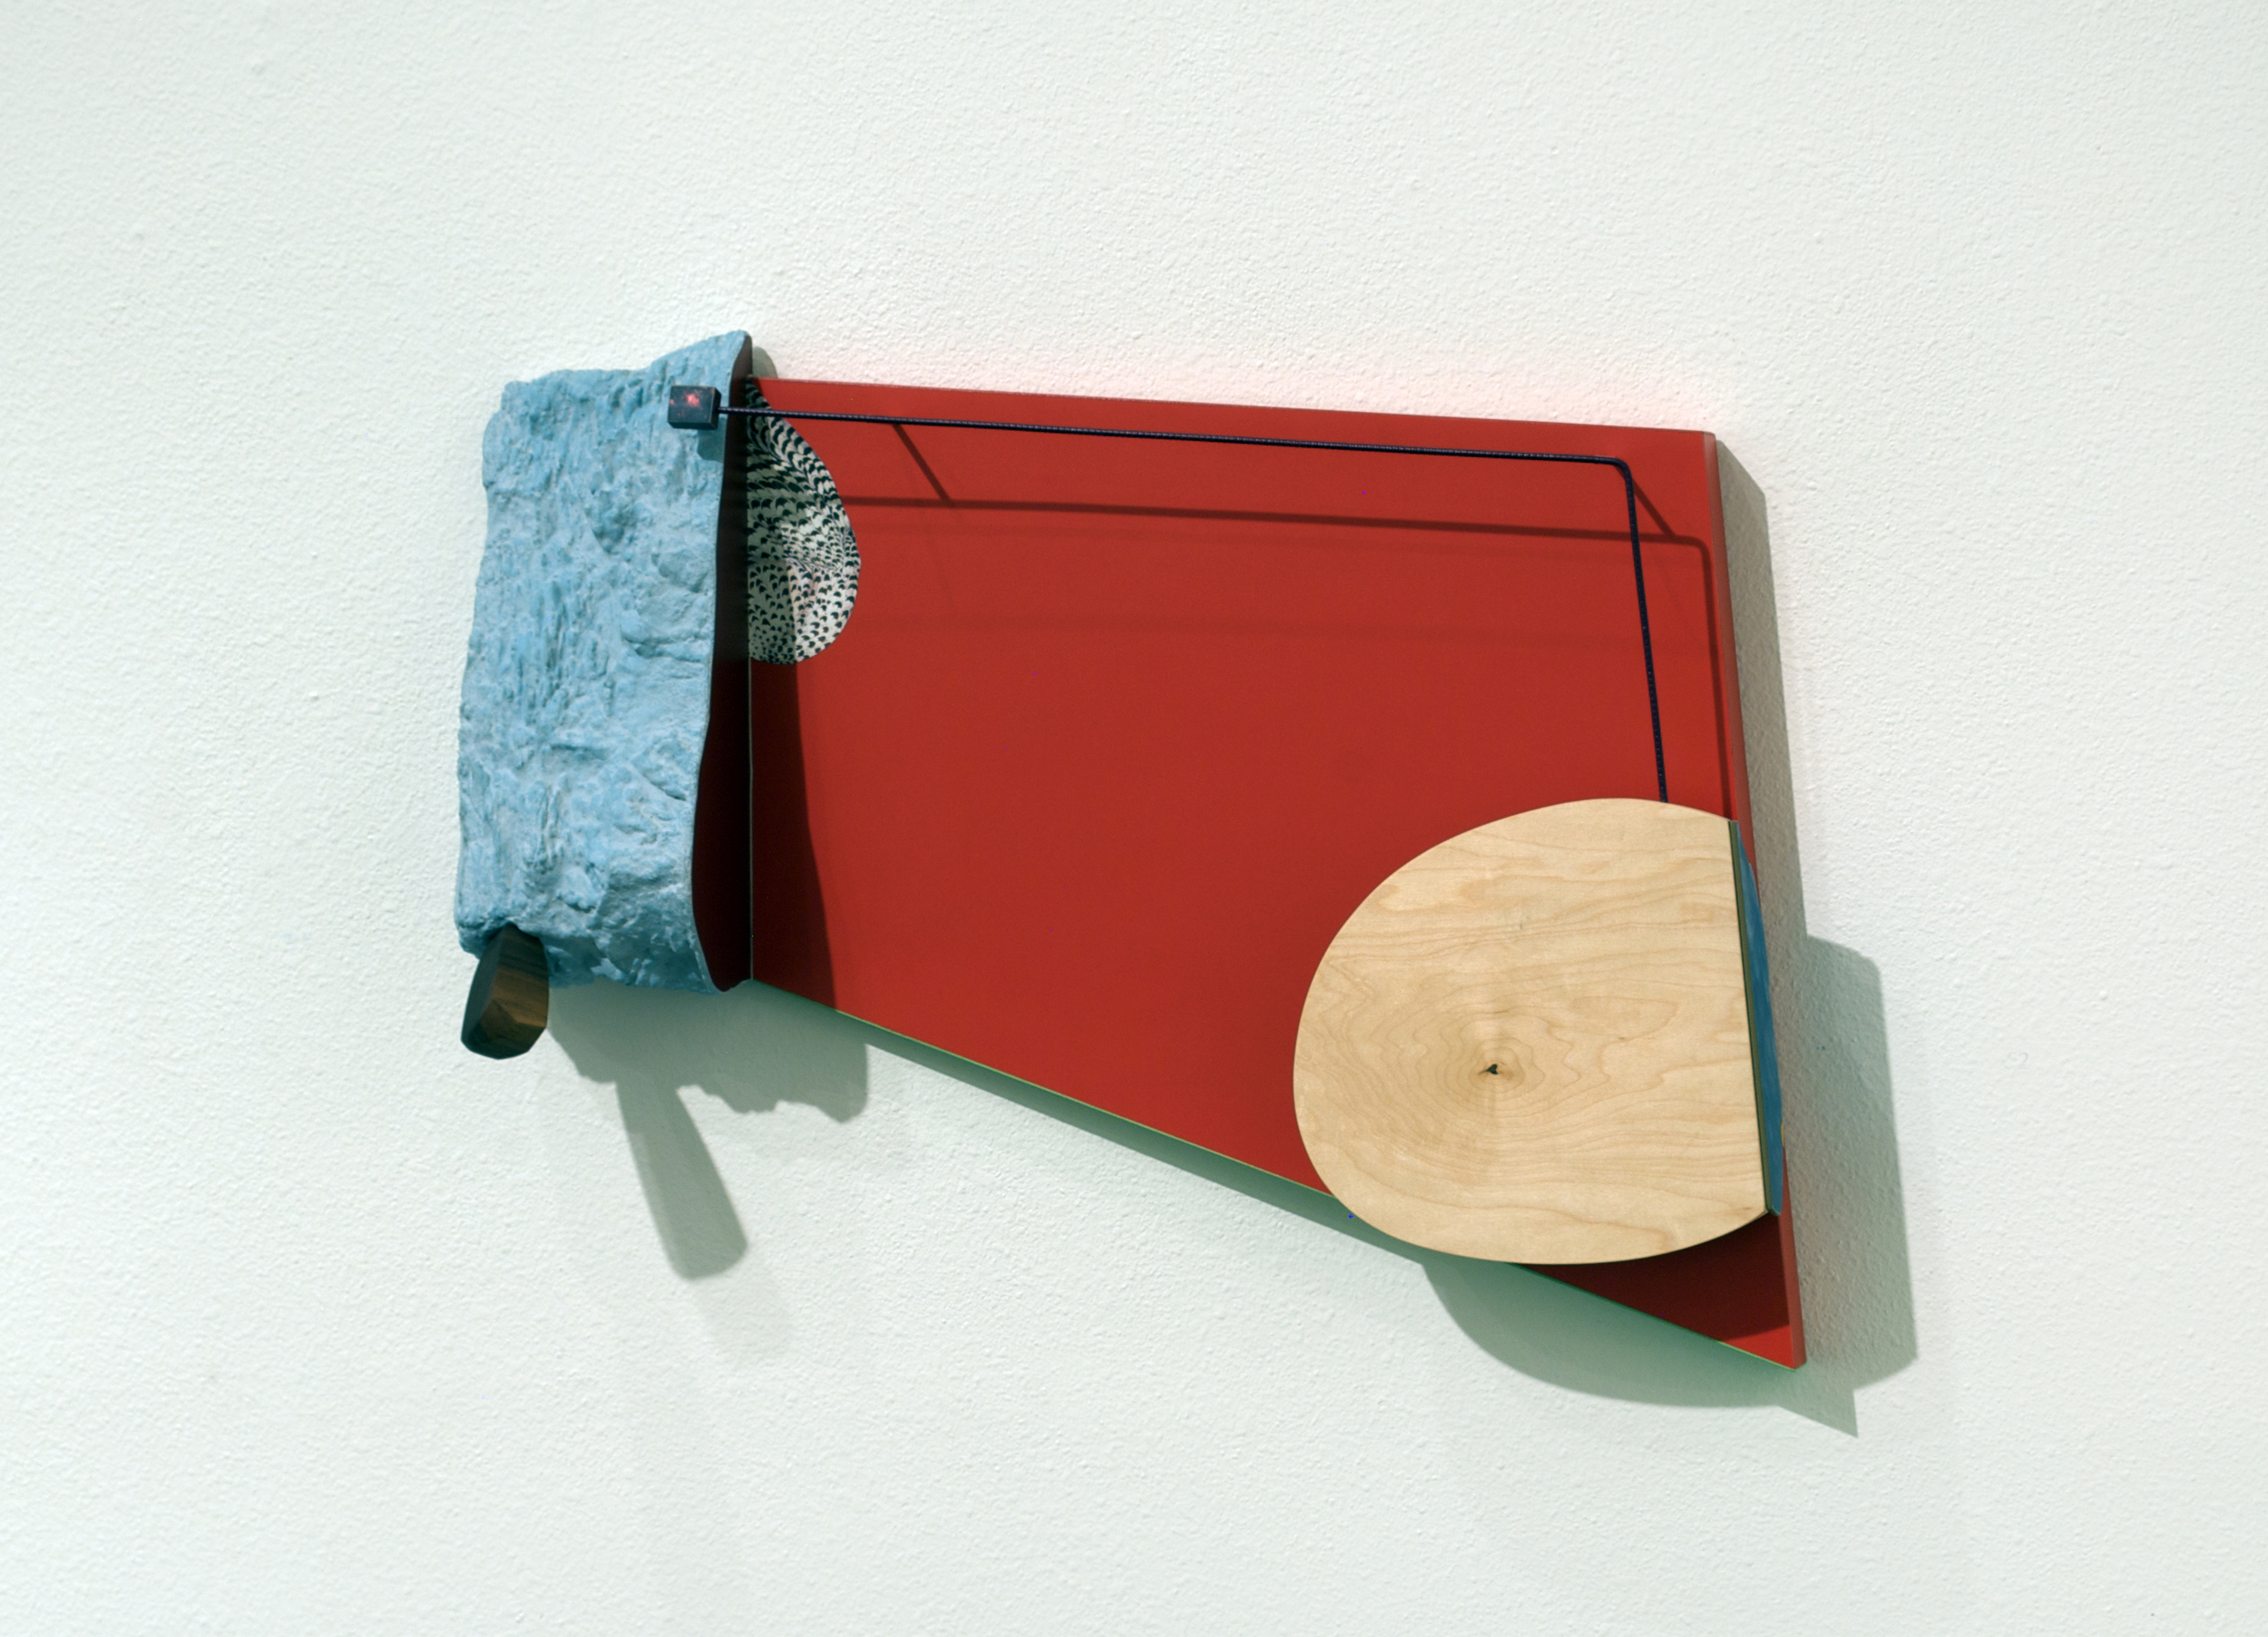   He smoked cigars and told funny jokes,&nbsp; 2012  wood, formica, foam, paint, and cut paper.&nbsp;20 x 28 x 6.5 inches 